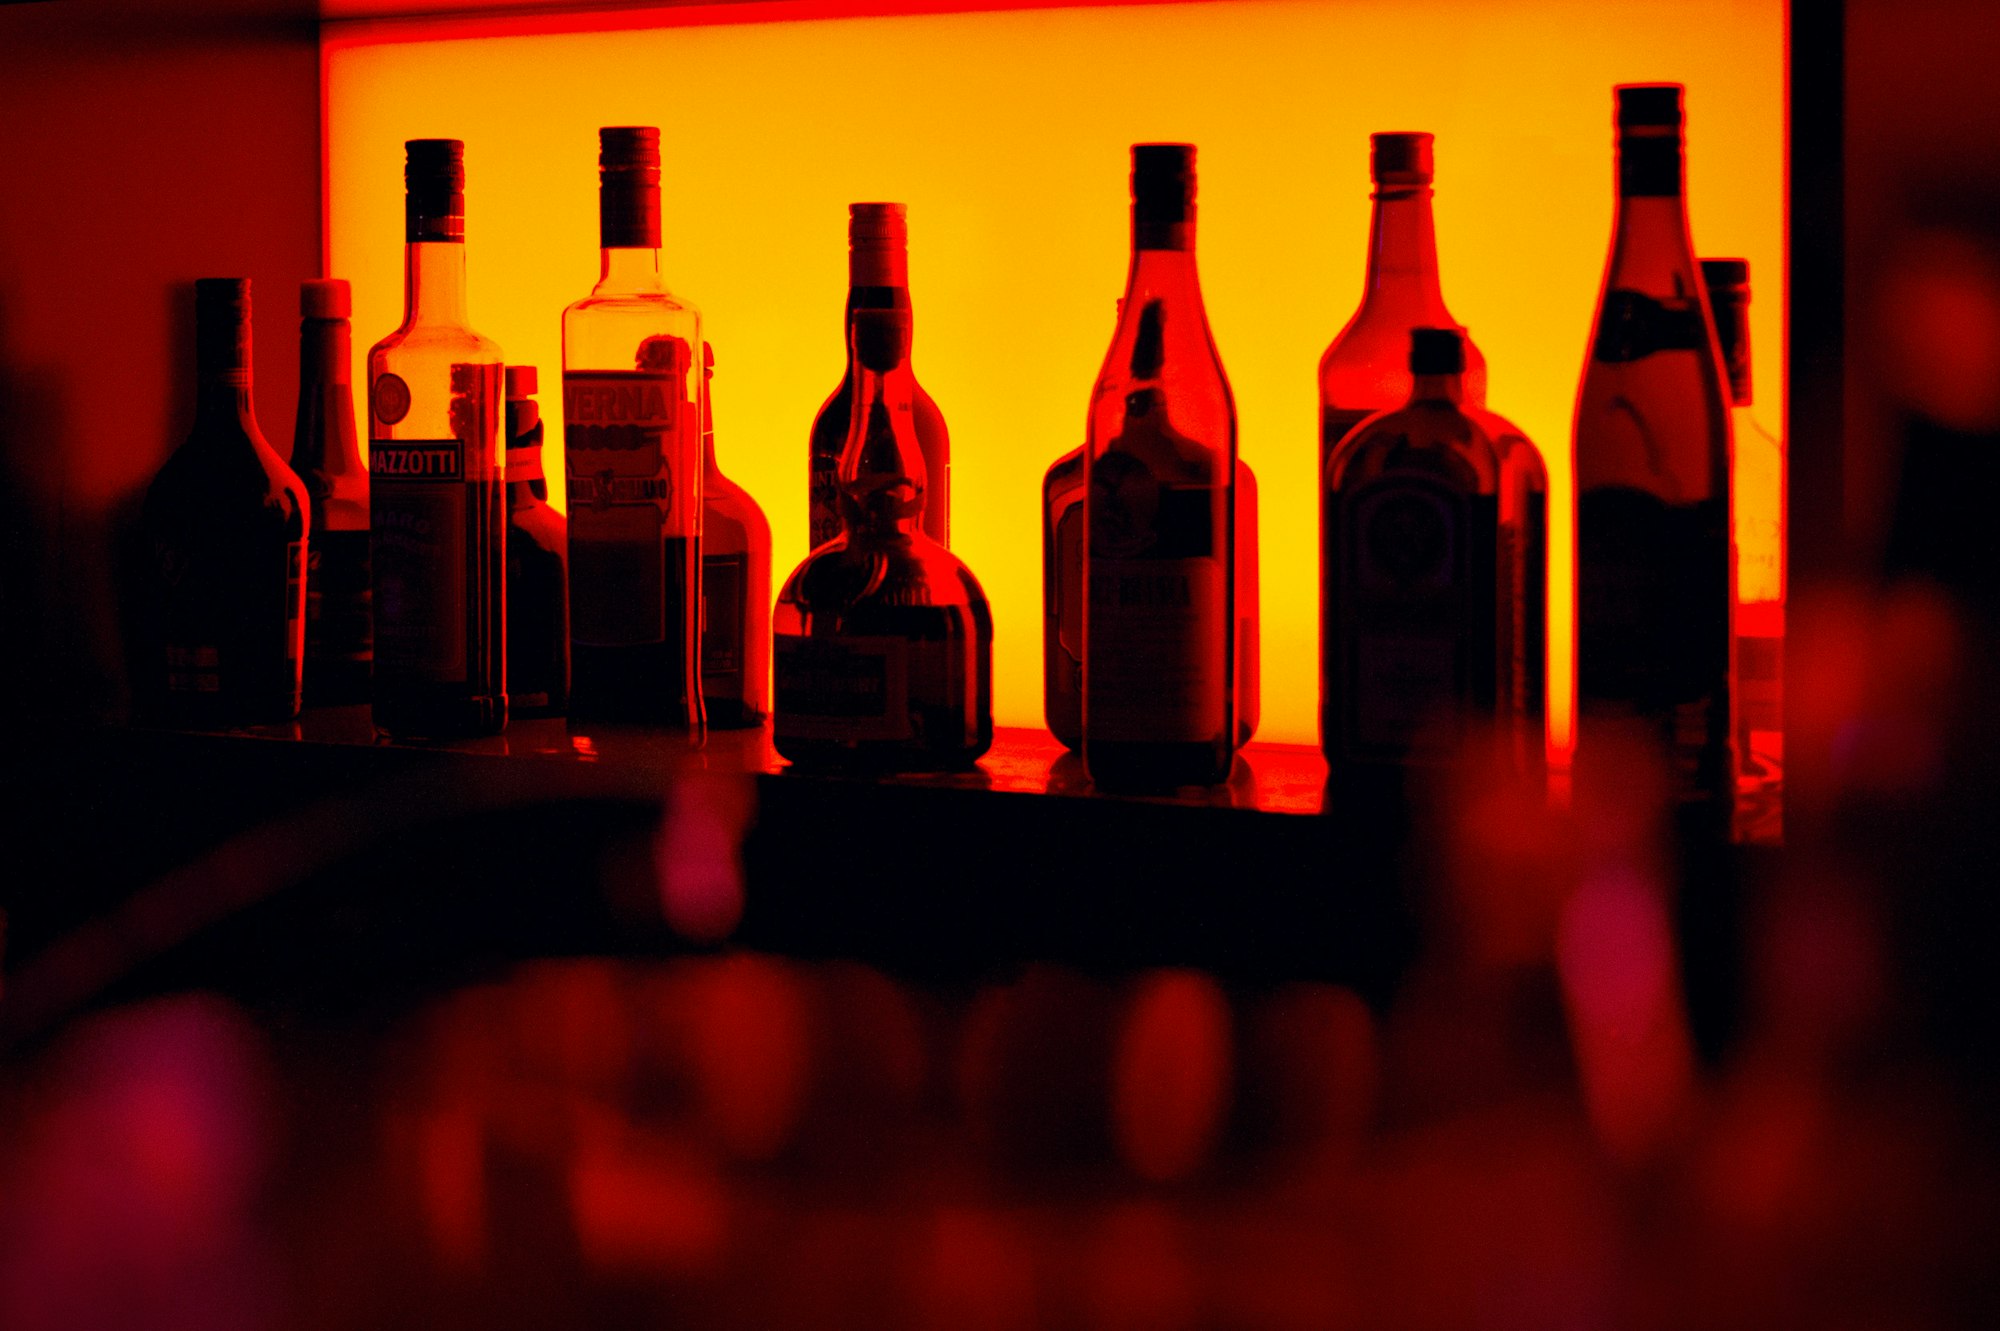 Image of various bottles of alcohol in front of a glowing background at a bar.